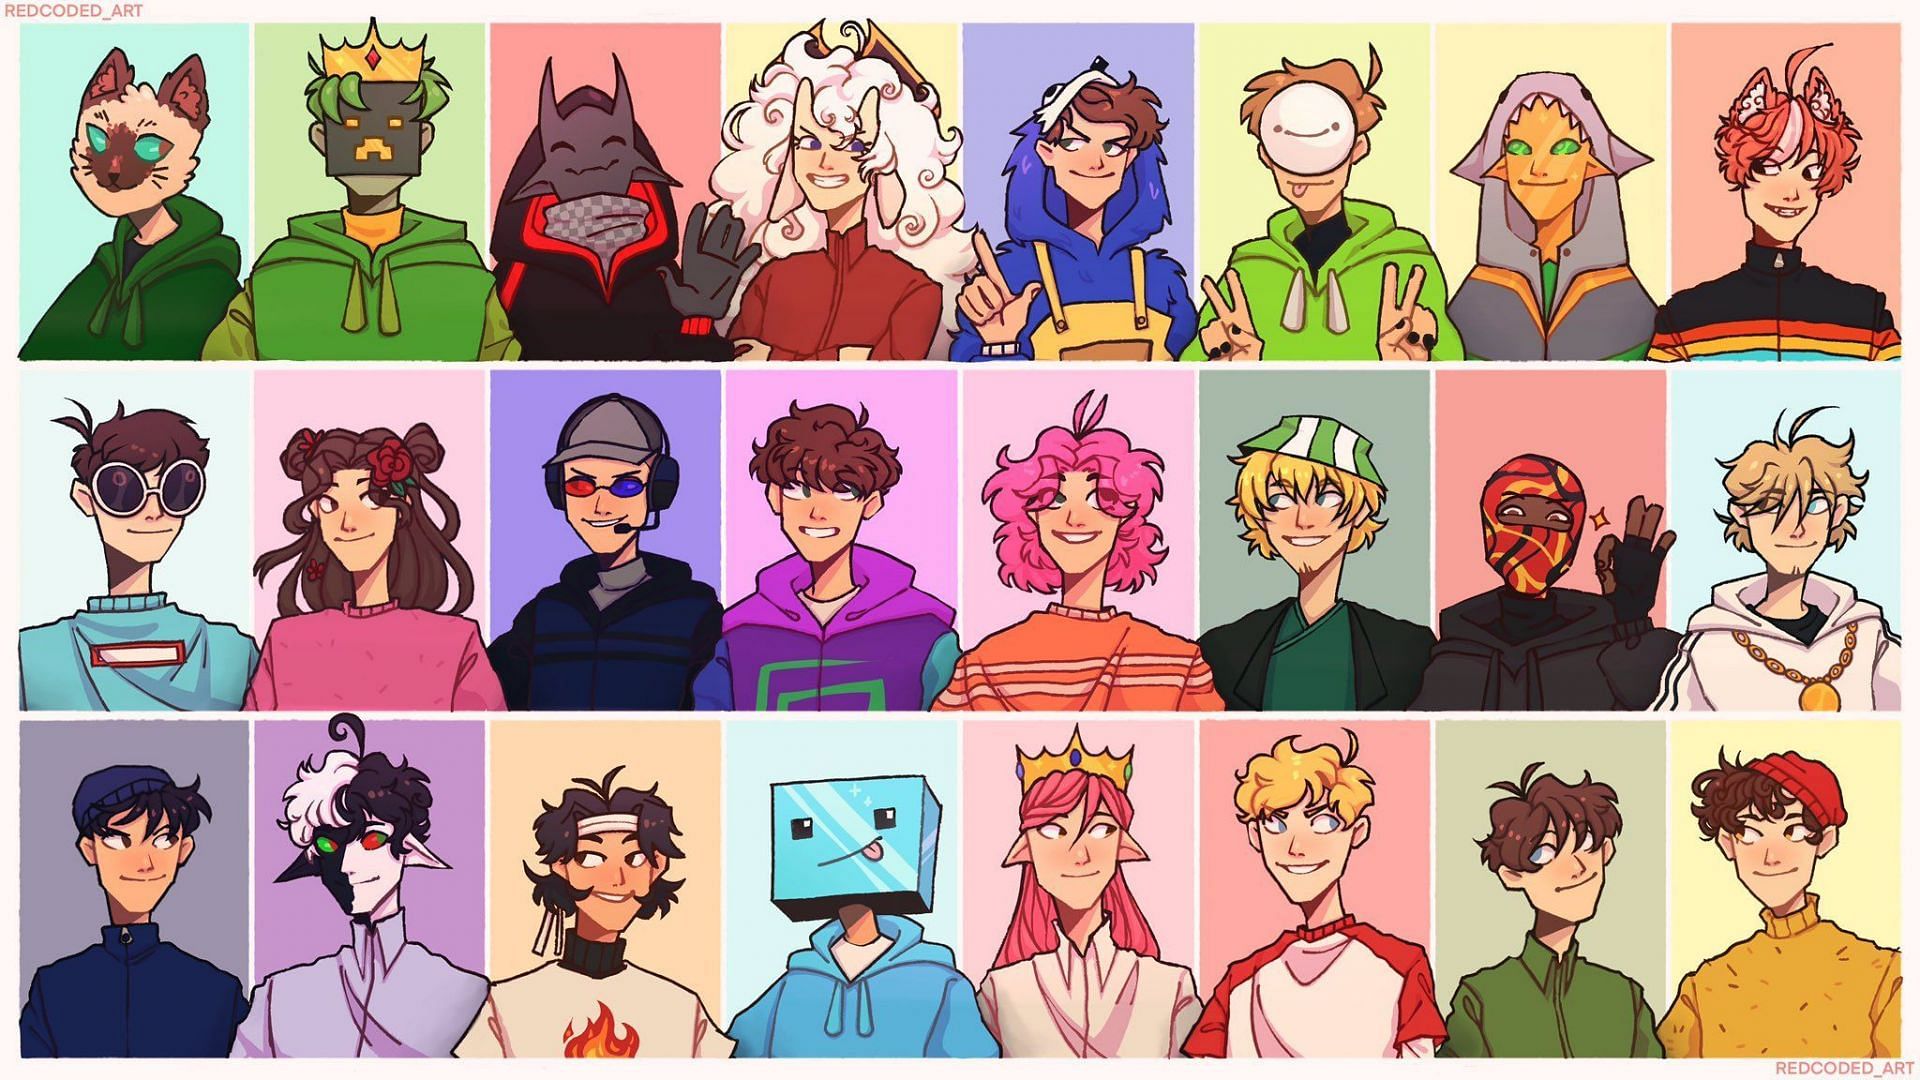 The cast of Dream SMP, the largest SMP of all time (Image by Redcoded_art)